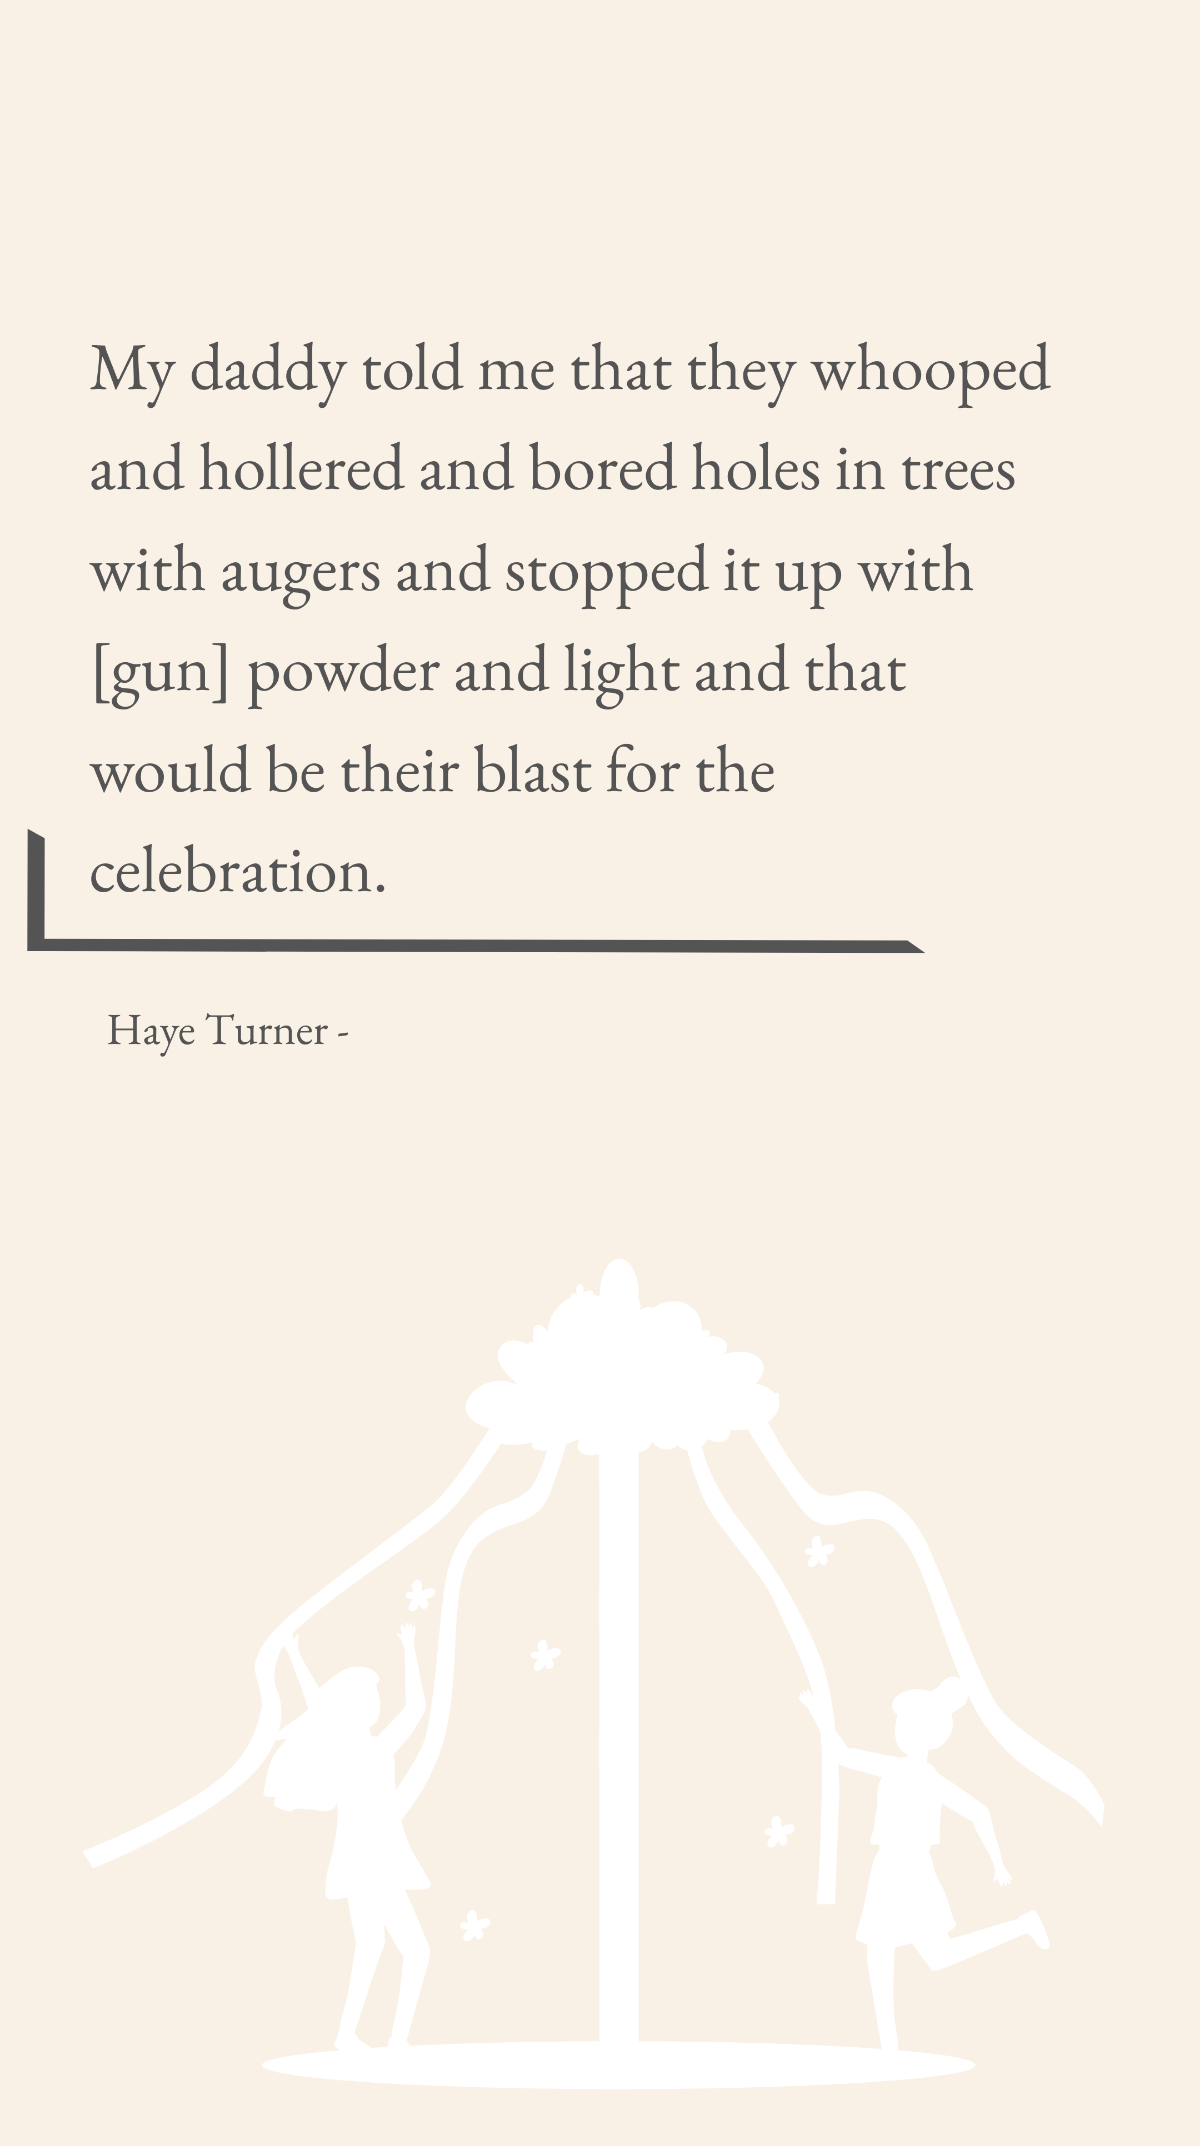 Haye Turner - My daddy told me that they whooped and hollered and bored holes in trees with augers and stopped it up with [gun] powder and light and that would be their blast for the celebration. Temp